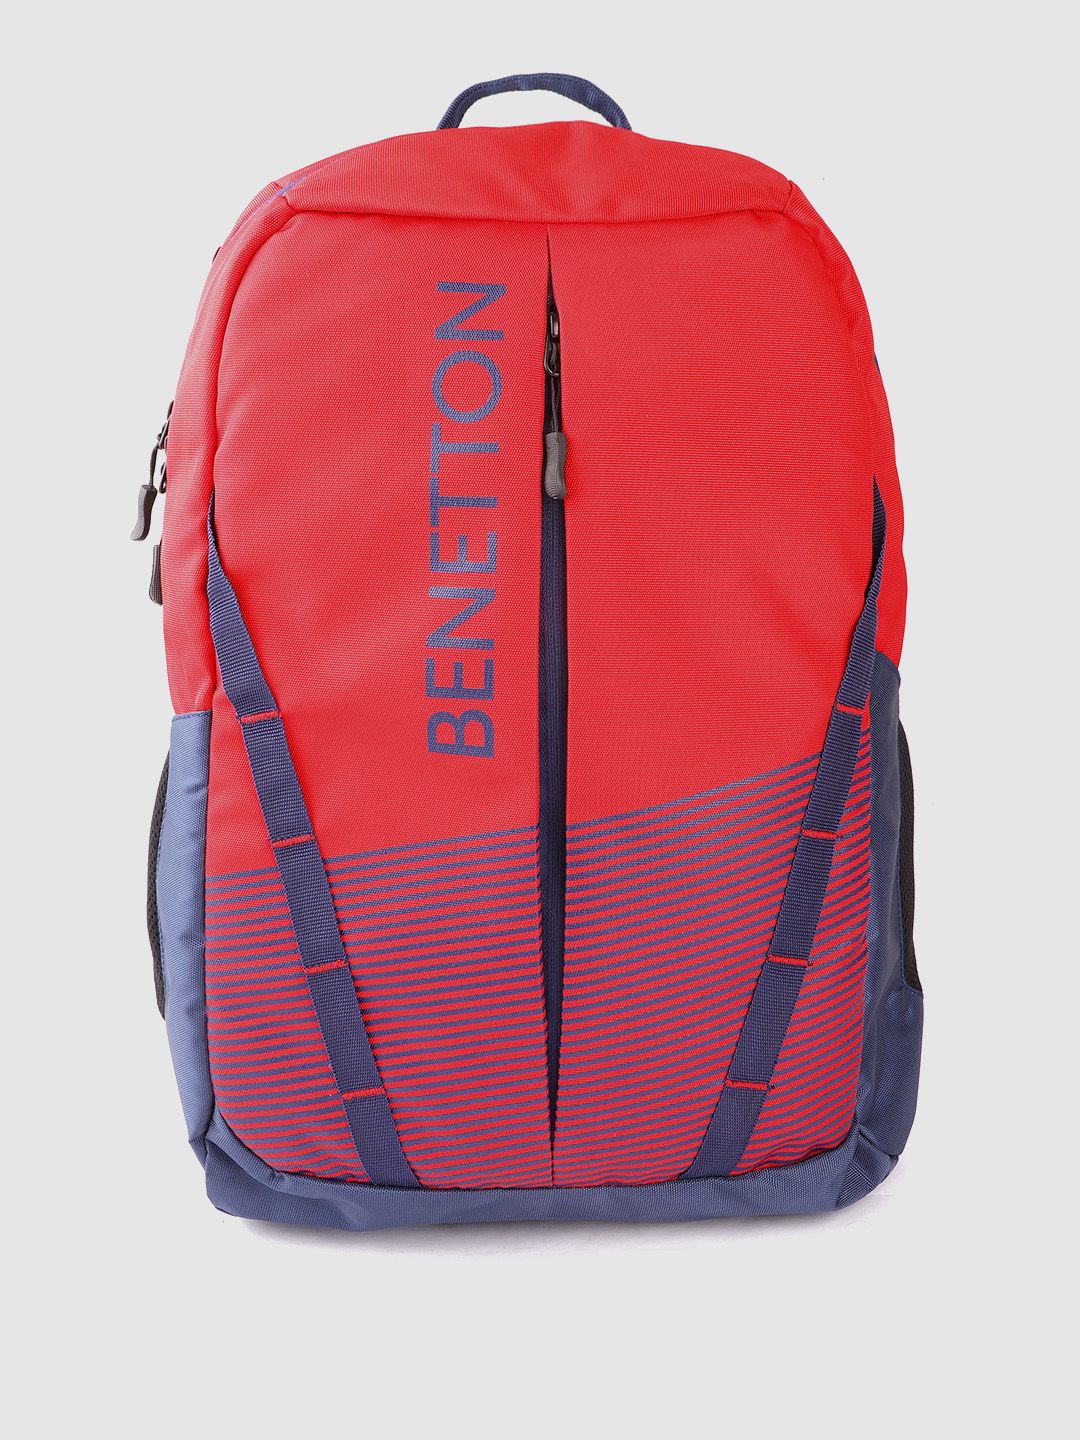 United Colors of Benetton Unisex Red Brand Logo Print 15 Inch Laptop Backpack Price in India